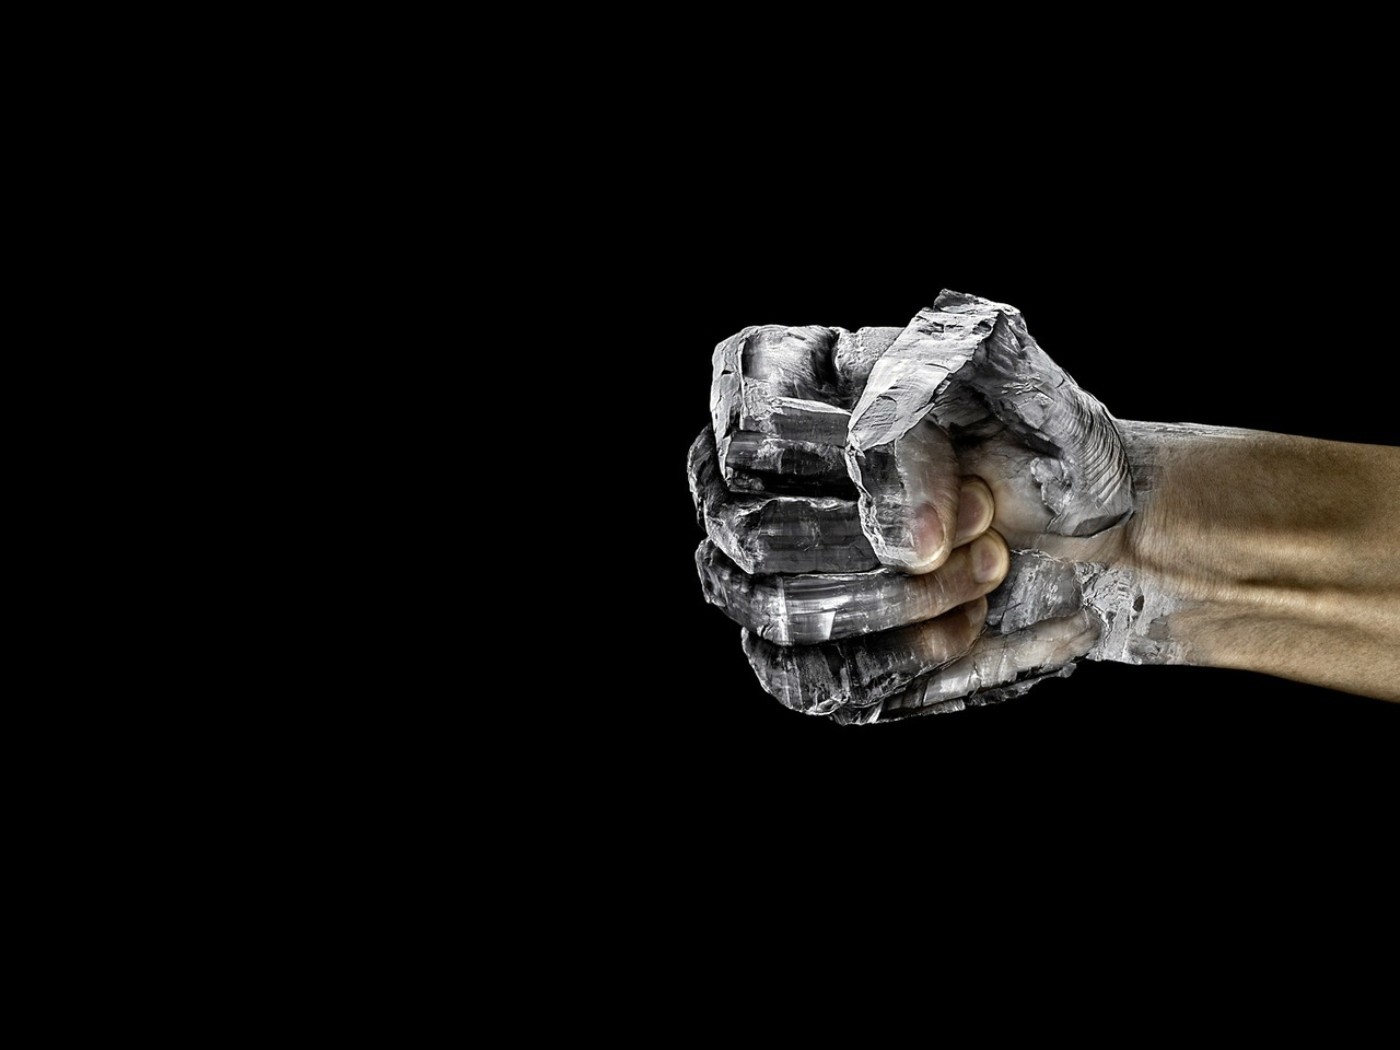 Hands Fist Wallpaper HDr Photography Black